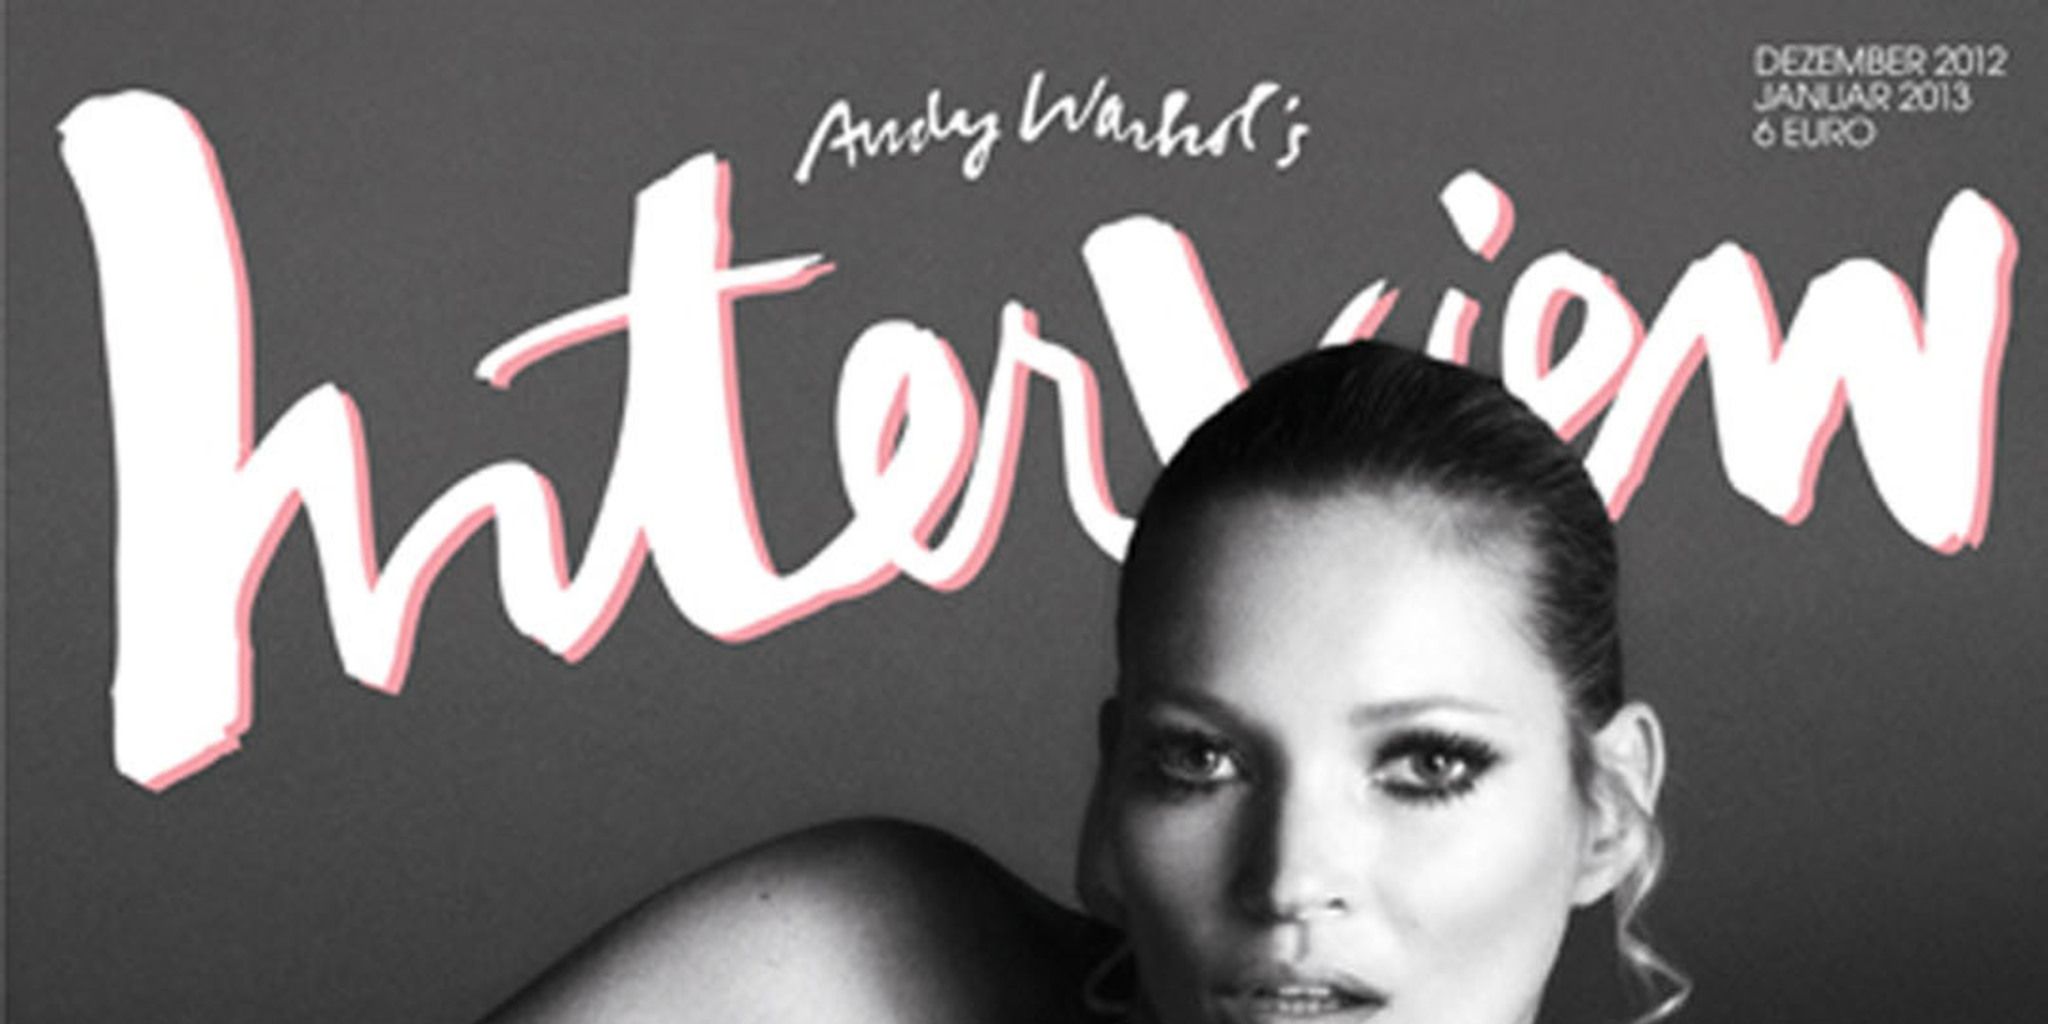 Kate Moss and Naomi Campbell feature together on cover of Russian 